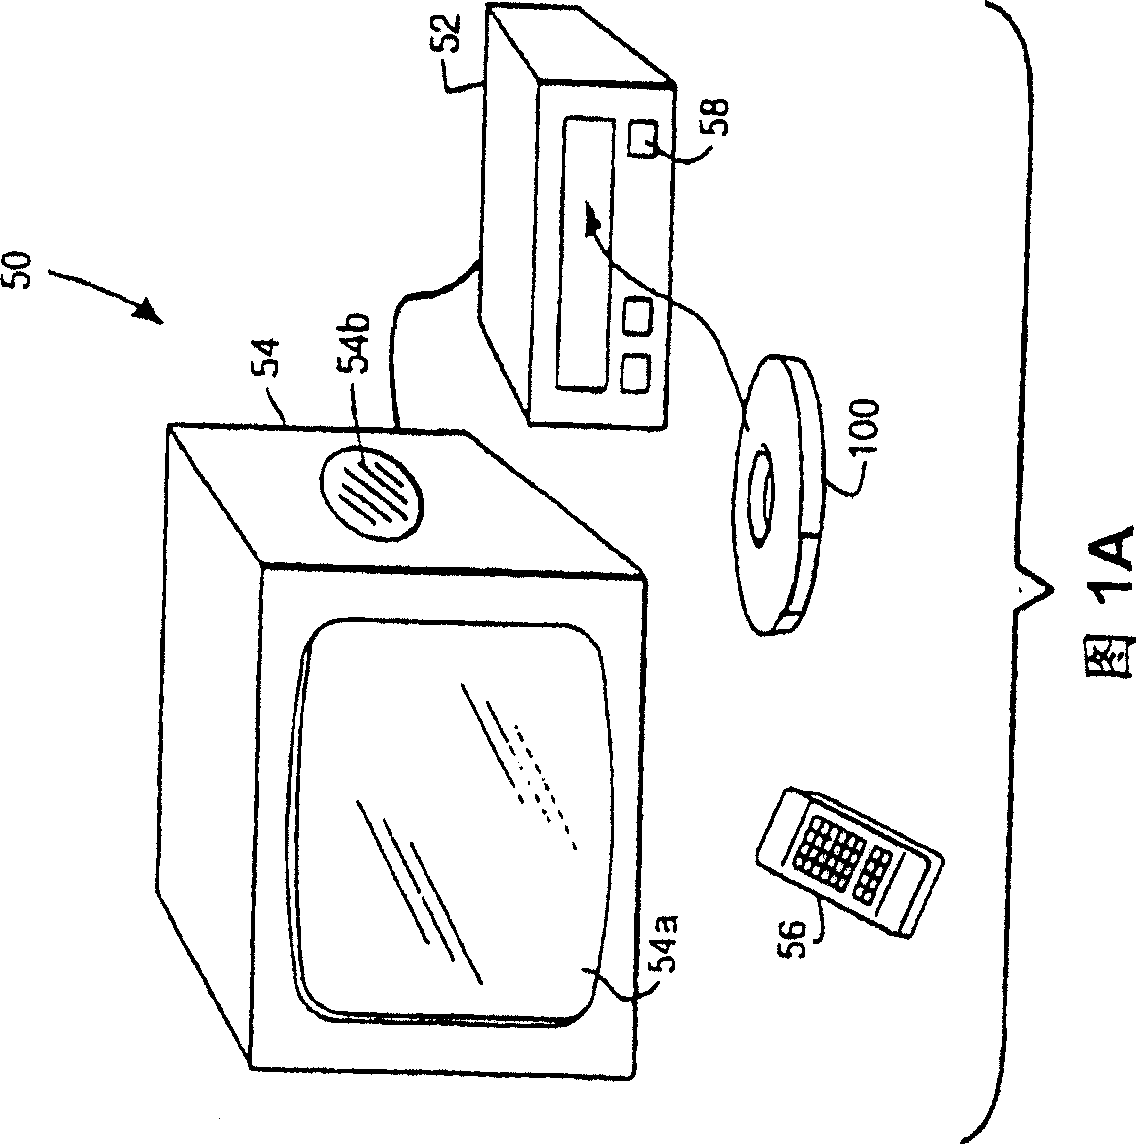 Method and device for obtaining DVD disc controlled content or information and method for controlling DVD device